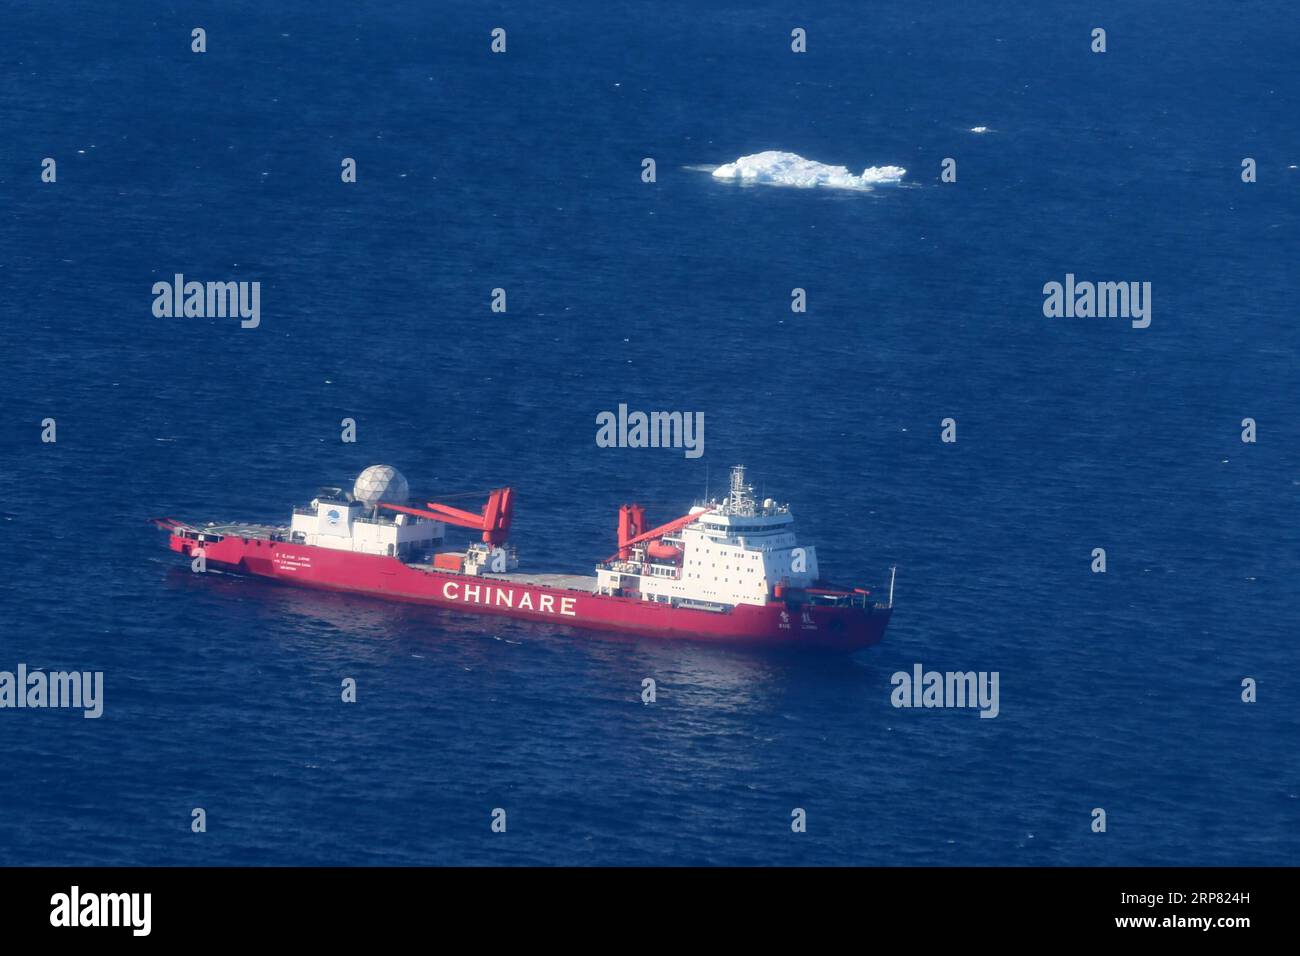 (190215) -- ABOARD XUELONG, Feb. 15, 2019 (Xinhua) -- China s research icebreaker Xuelong is seen near the Zhongshan Station, Feb. 14, 2019. China s research icebreaker Xuelong, with 126 crew members aboard on the 35th Antarctic research mission, on Thursday local time left the Zhongshan Station on its way back to China. Snow Eagle 601, China s first fixed-wing aircraft for polar flight, on Thursday night also departed from the Antarctic after completing all assignments. (Xinhua/Liu Shiping) ANTARCTICA-SCI-TECH-CHINA-XUELONG-SAIL PUBLICATIONxNOTxINxCHN Stock Photo